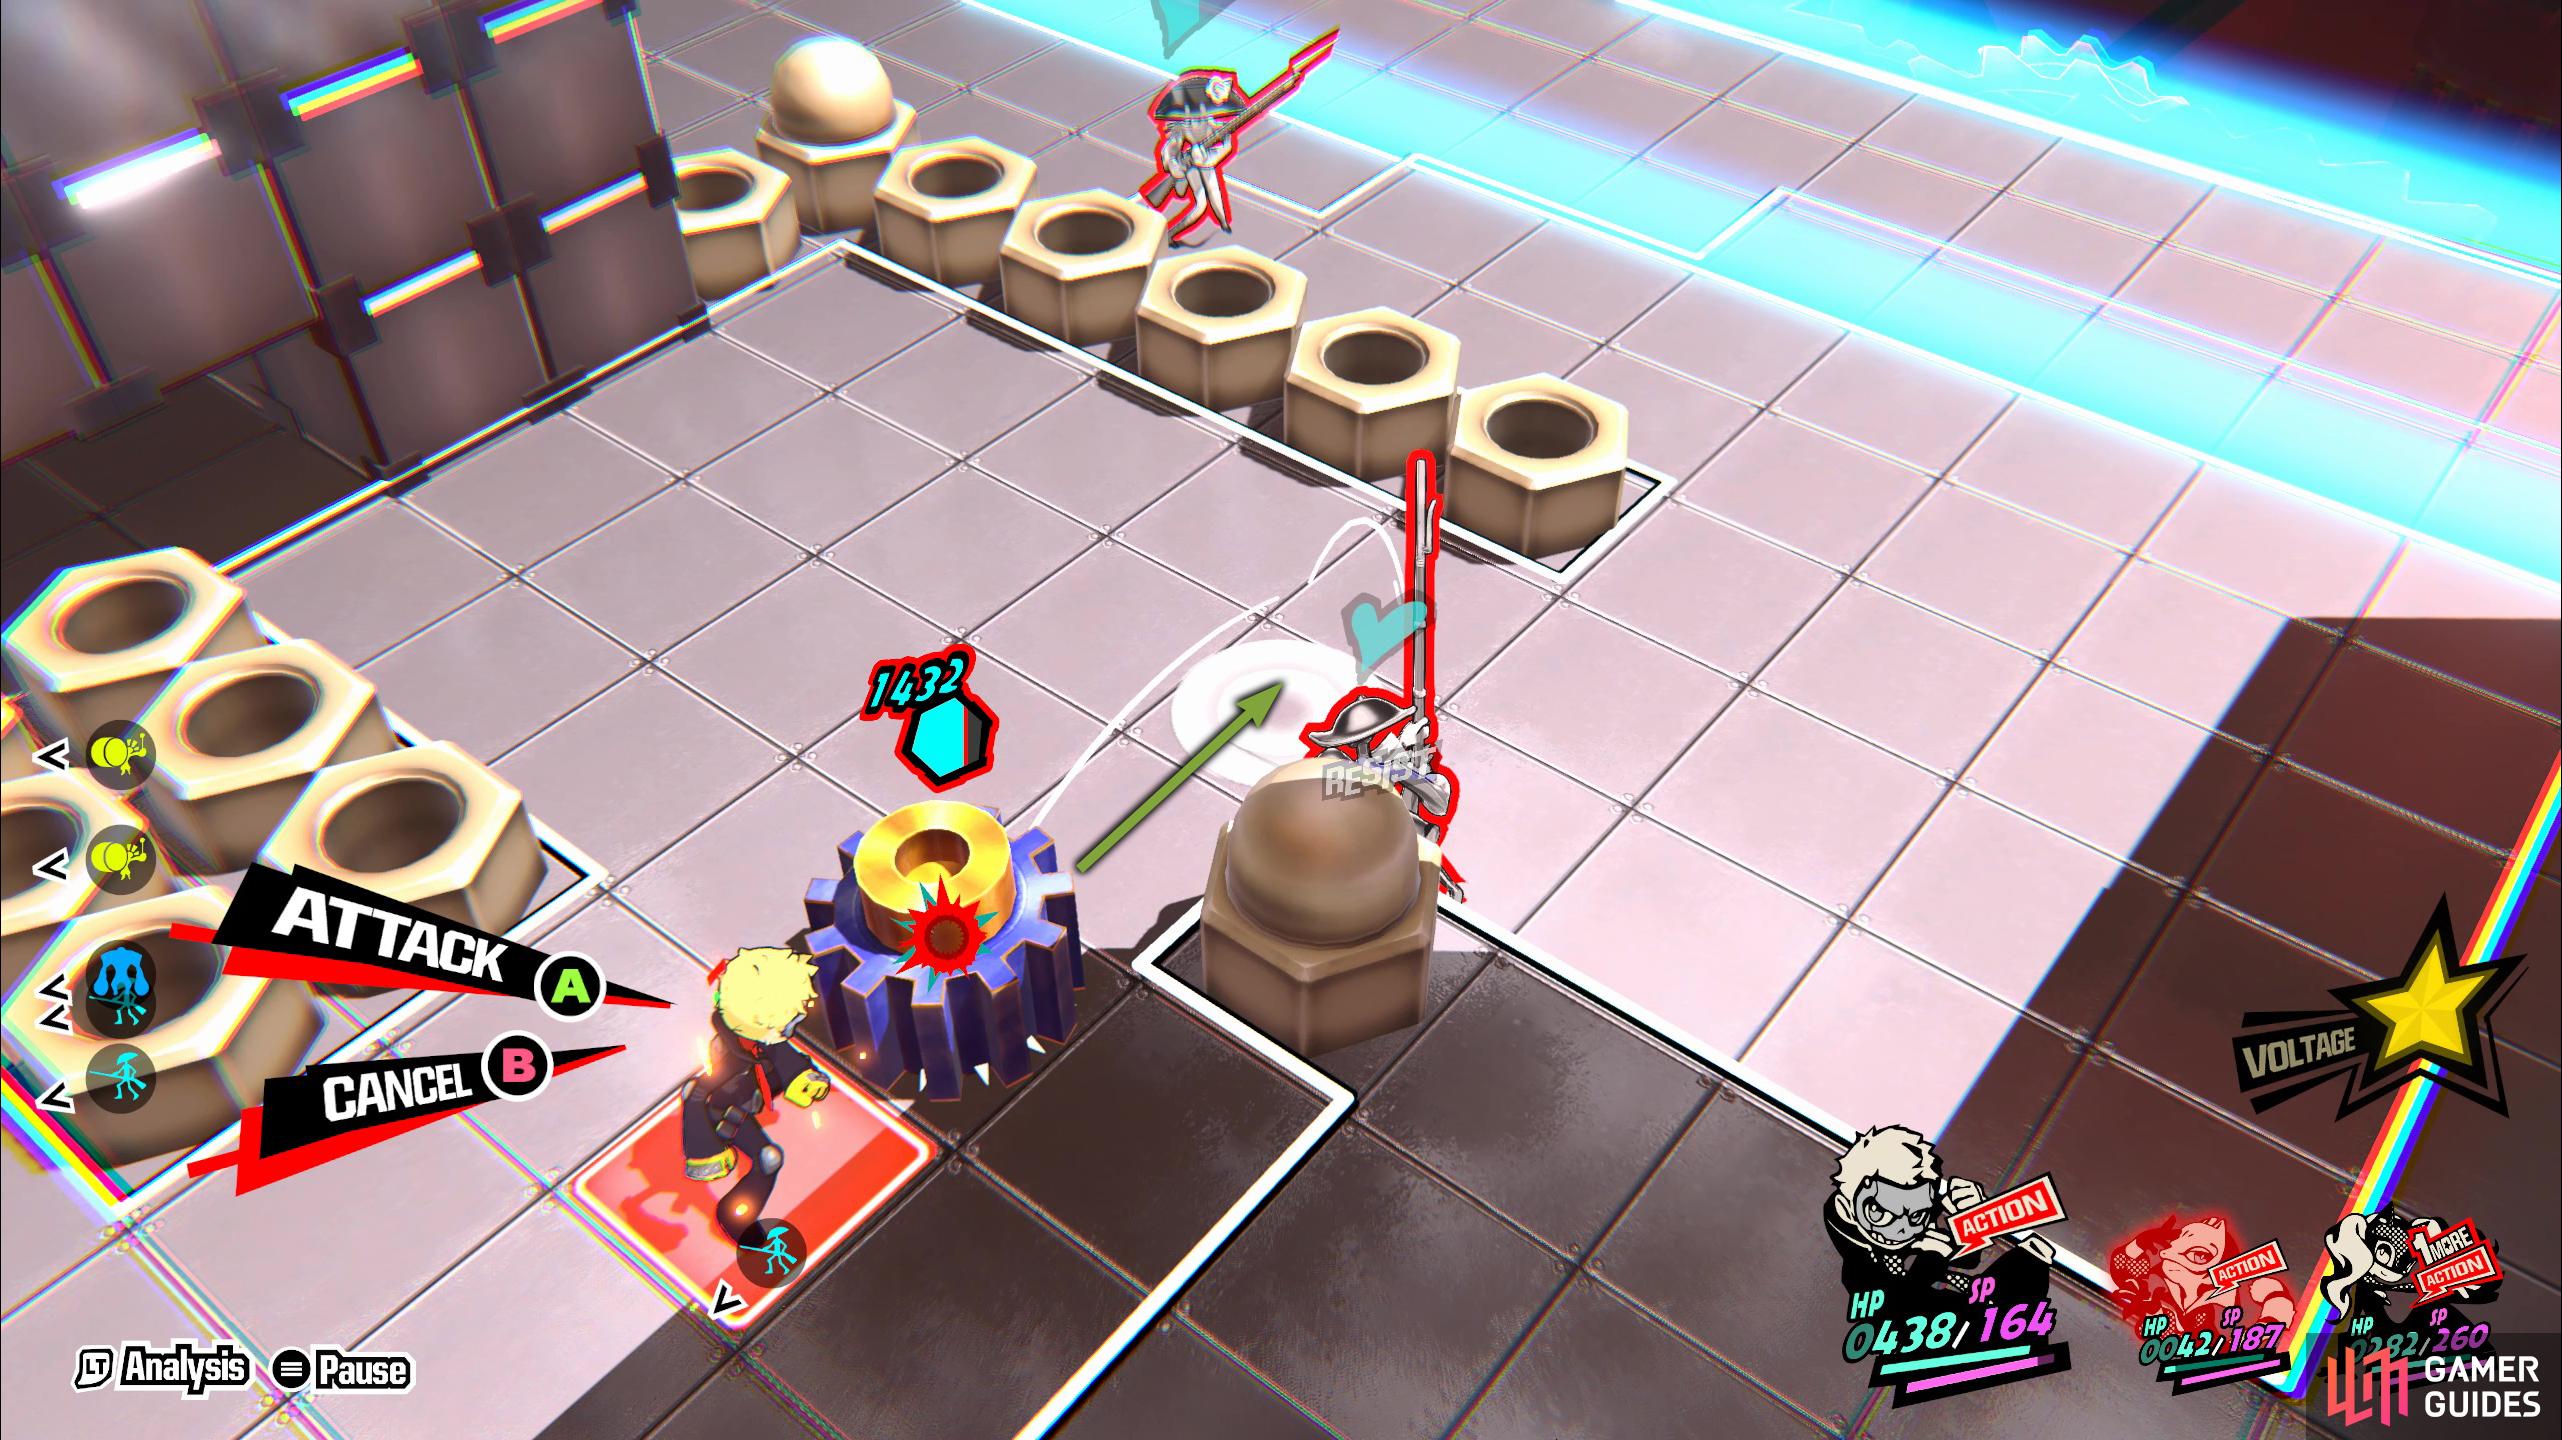 Step 5: Move Ryuji over to the gear and push it further forward.